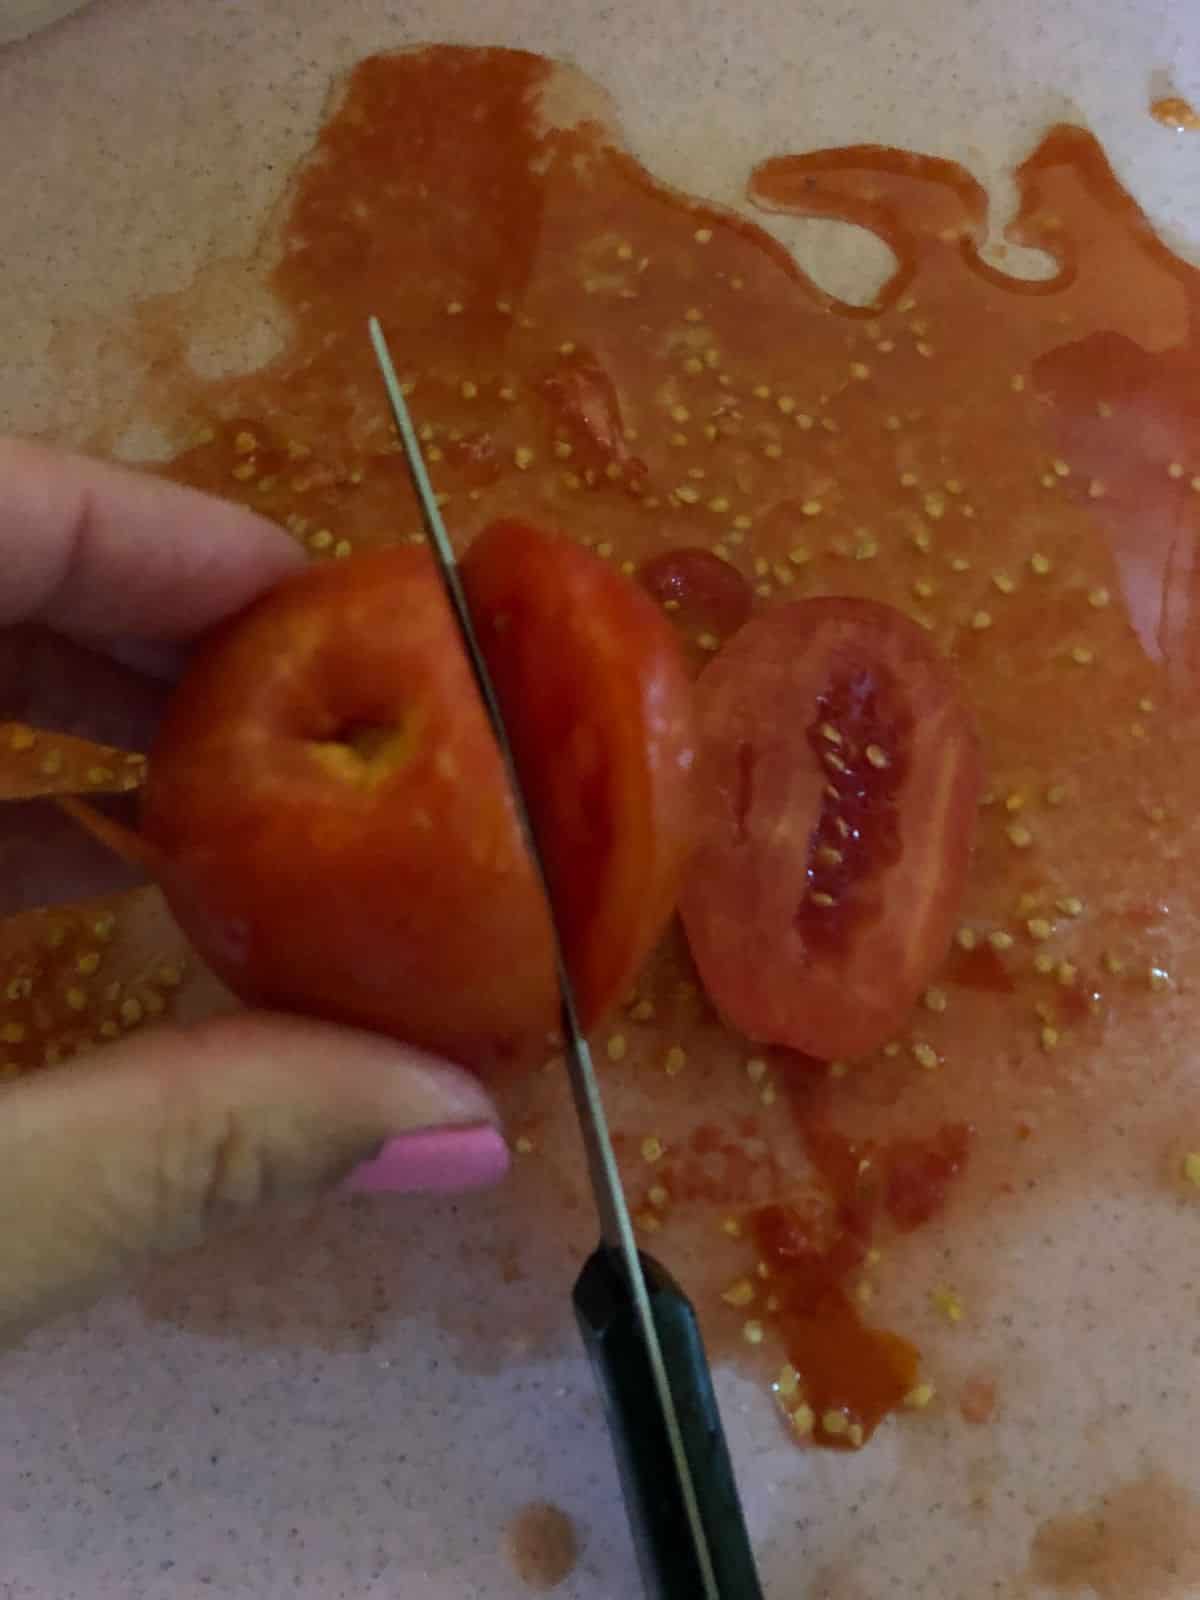 Tomatoes being sliced to dehydrate